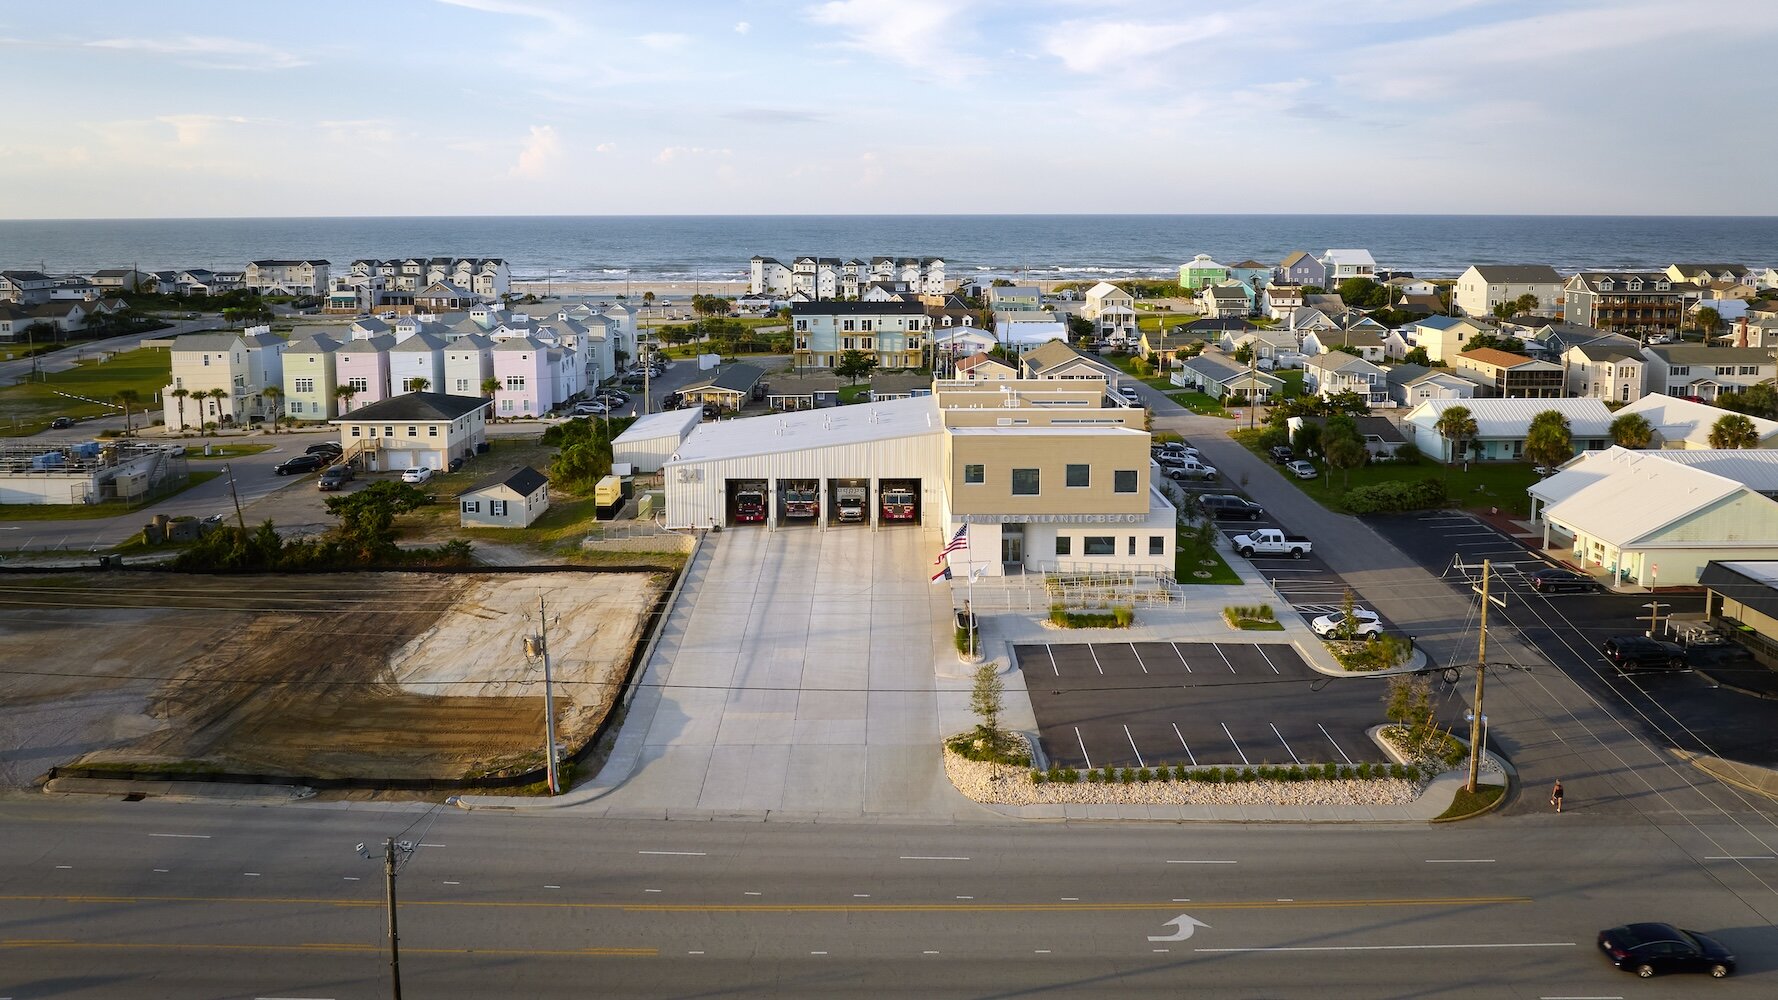 A North Carolina Beach Town Builds a Public Safety Complex With an Eye on a More Resilient Future